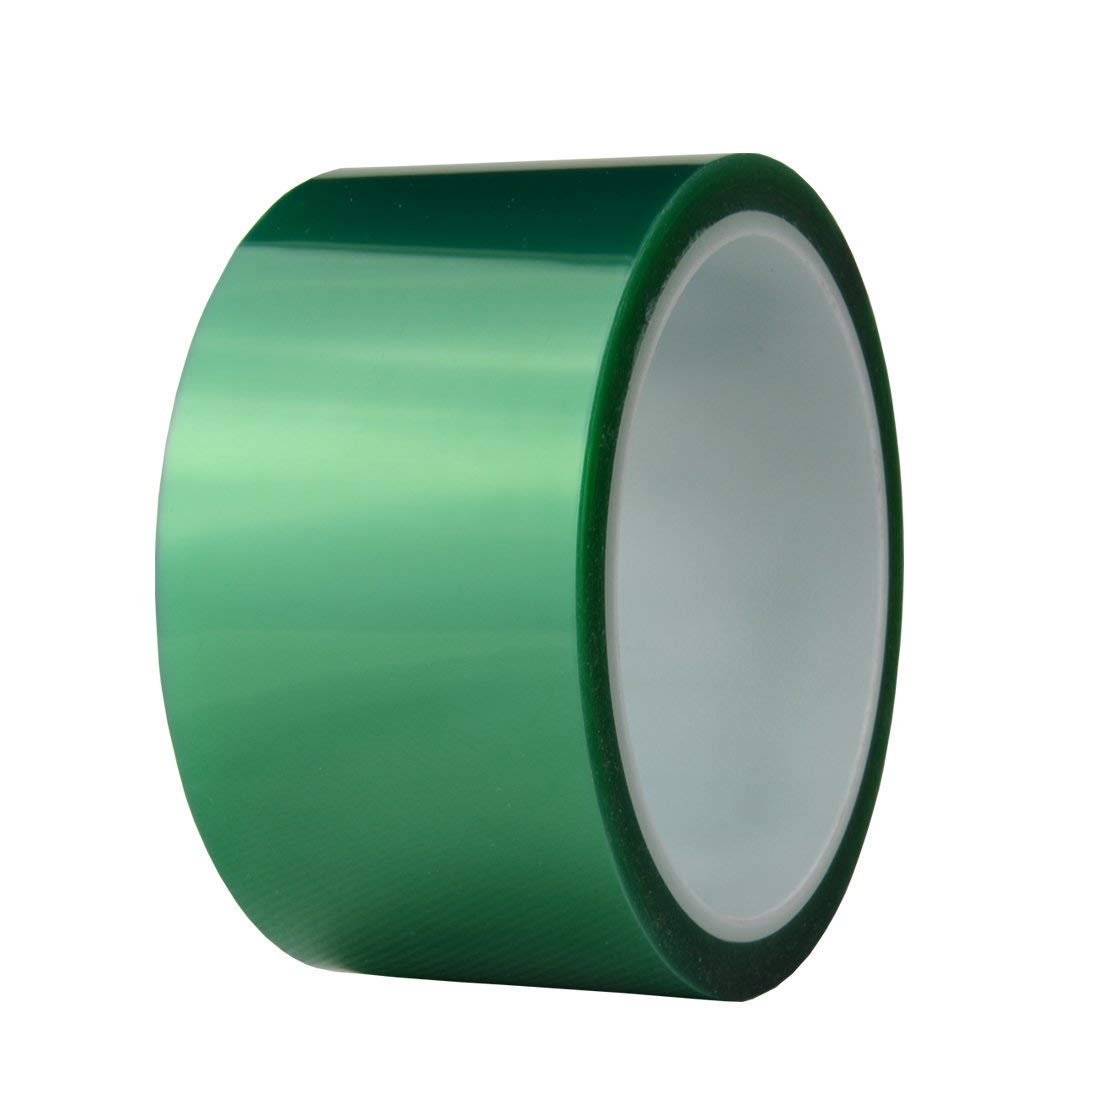 6 Rolls Green Color Carton Sealing Packaging Packing Tape 2 Mil 48mm x ...